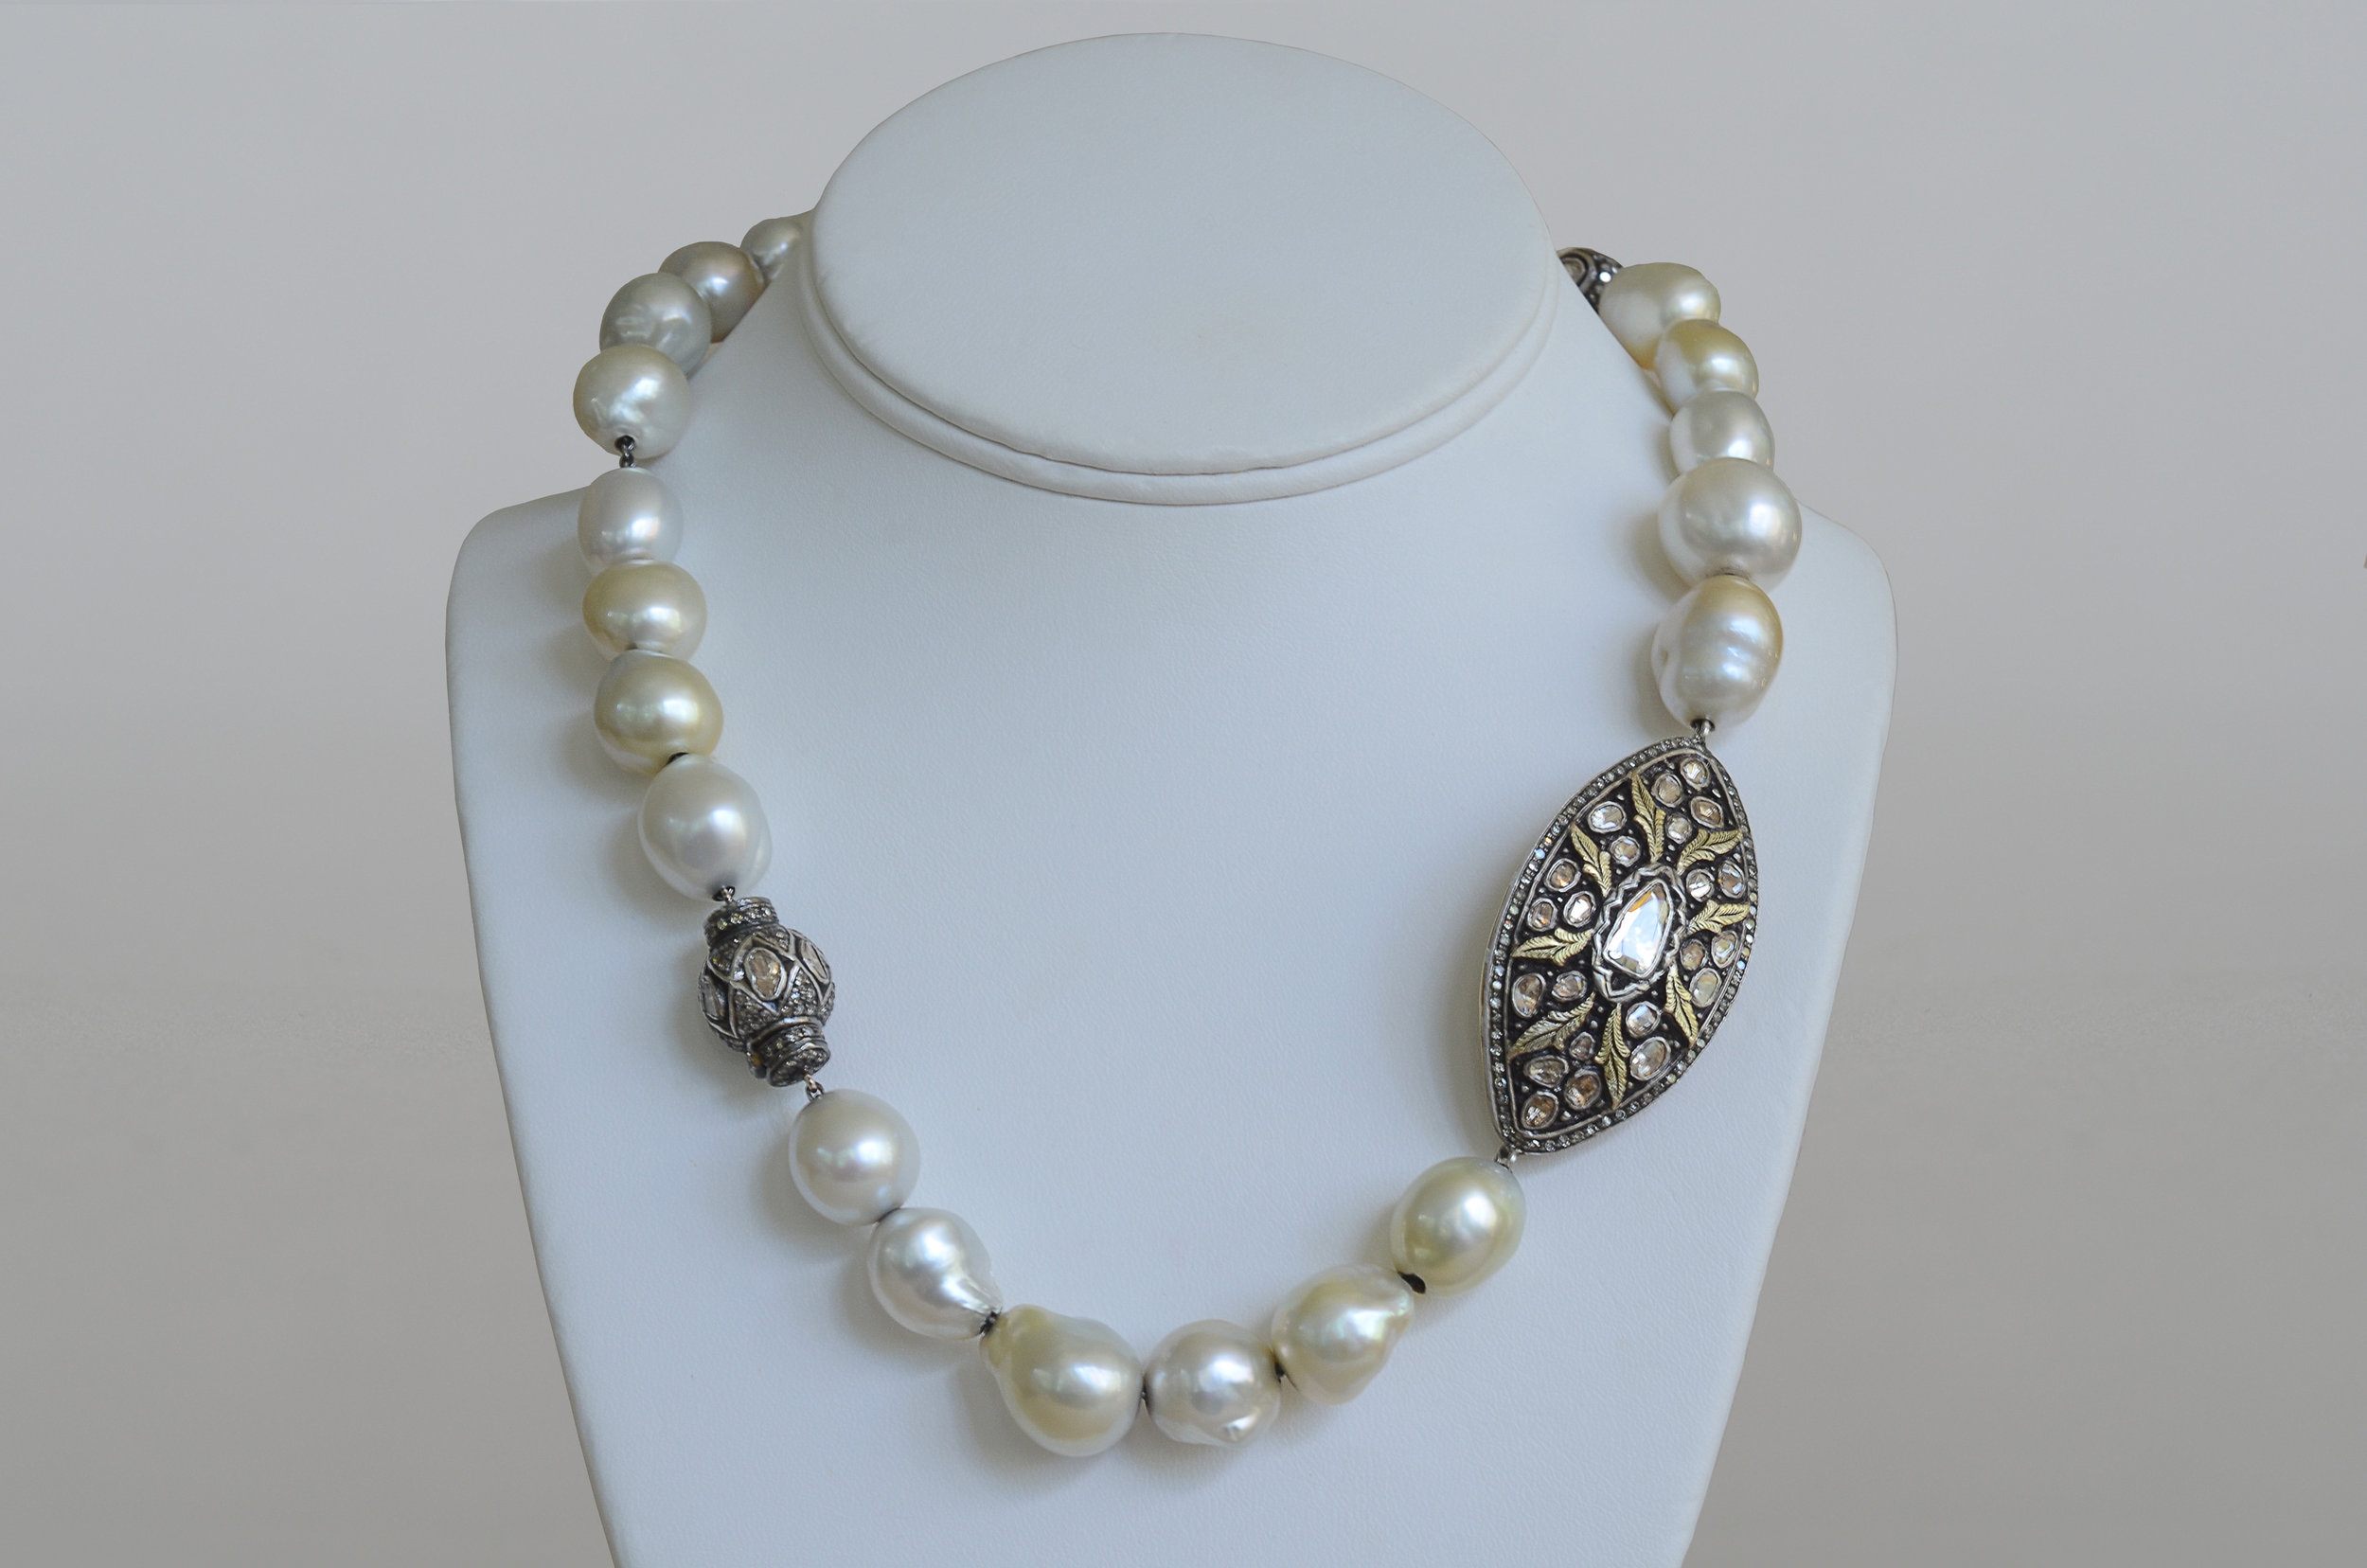 Pearl and Broach necklace.jpg